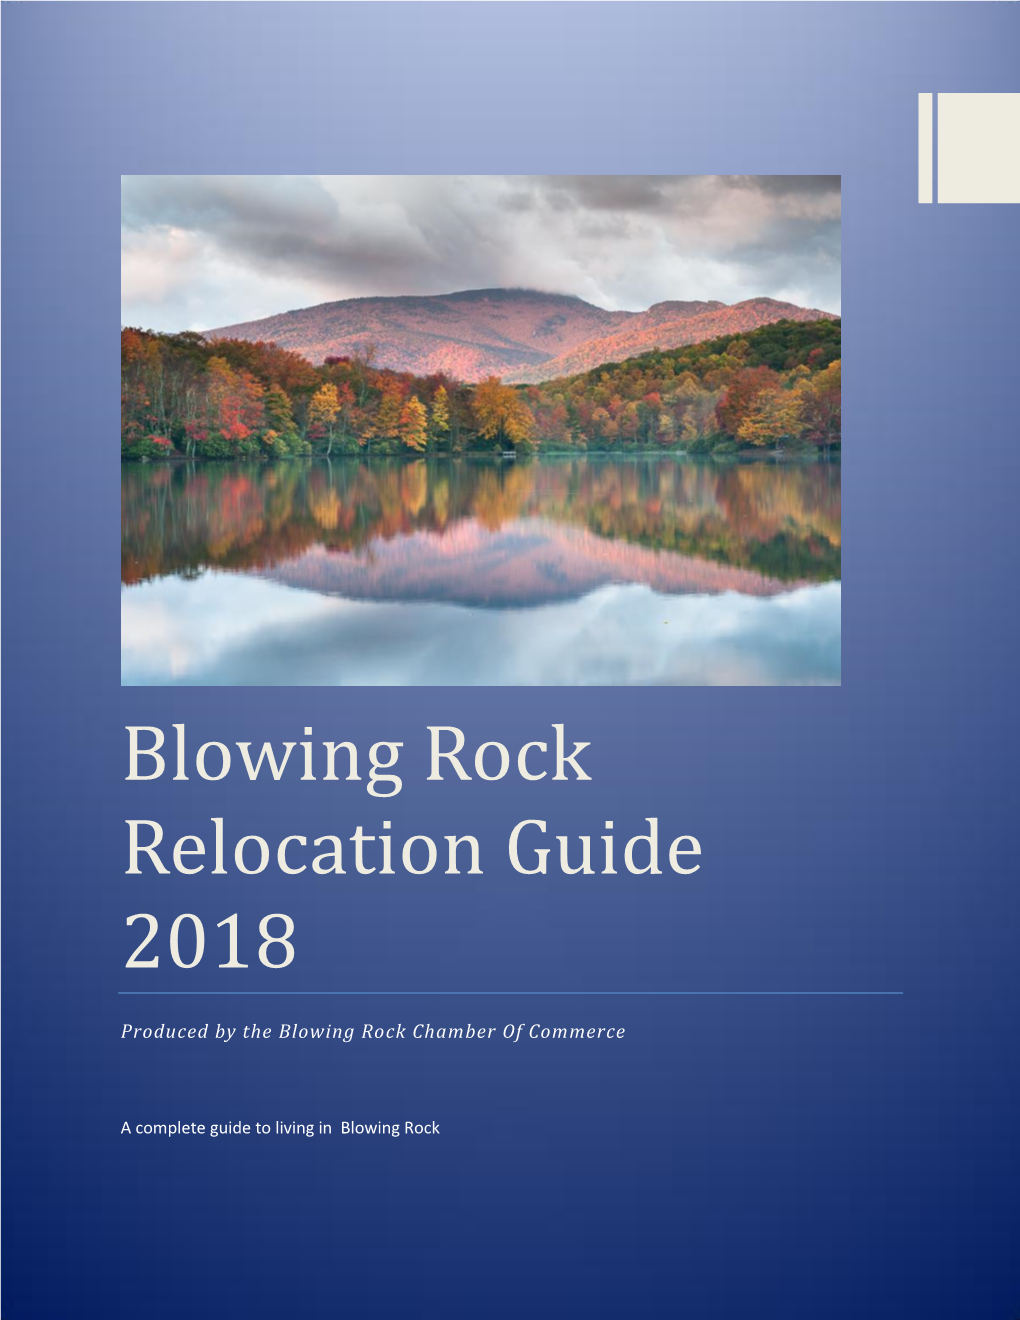 Blowing Rock Relocation Guide 2018